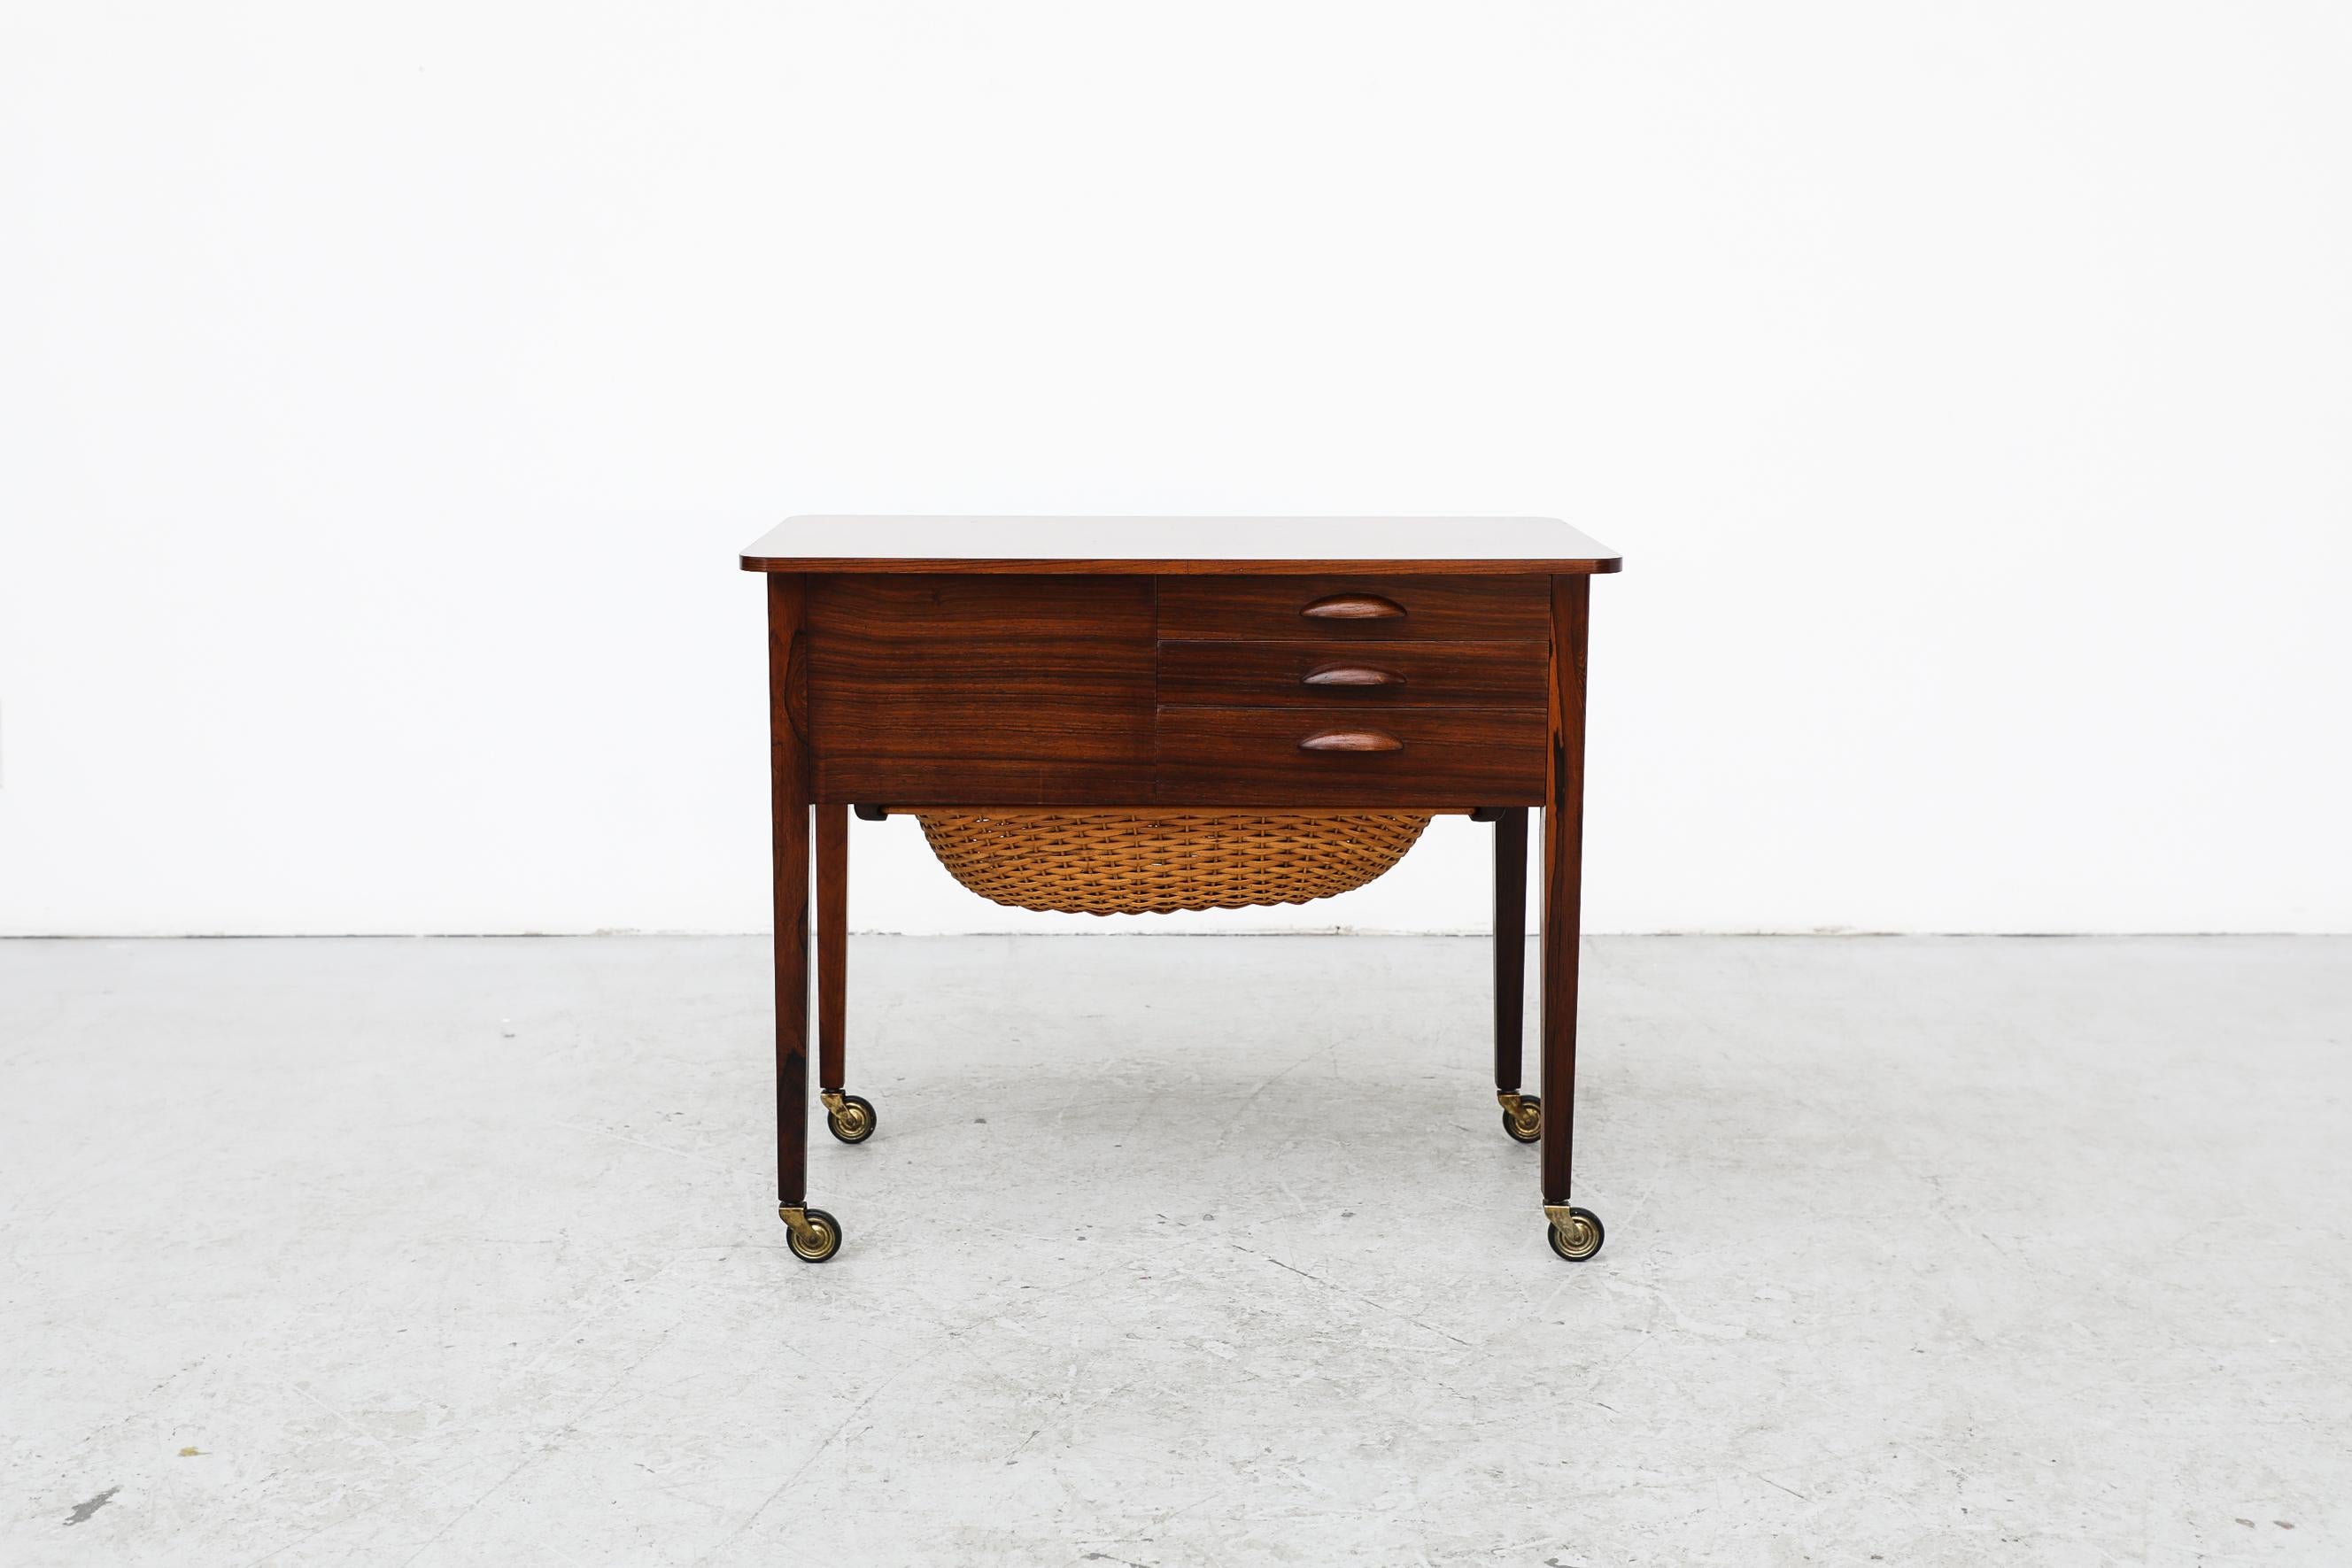 Charming Mid Century Danish Rosewood rolling side table with rattan sewing basket. The table has three front drawers, some with compartments and pegs for sewing gear and a bigger side drawer. In good original condition with normal wear consistent